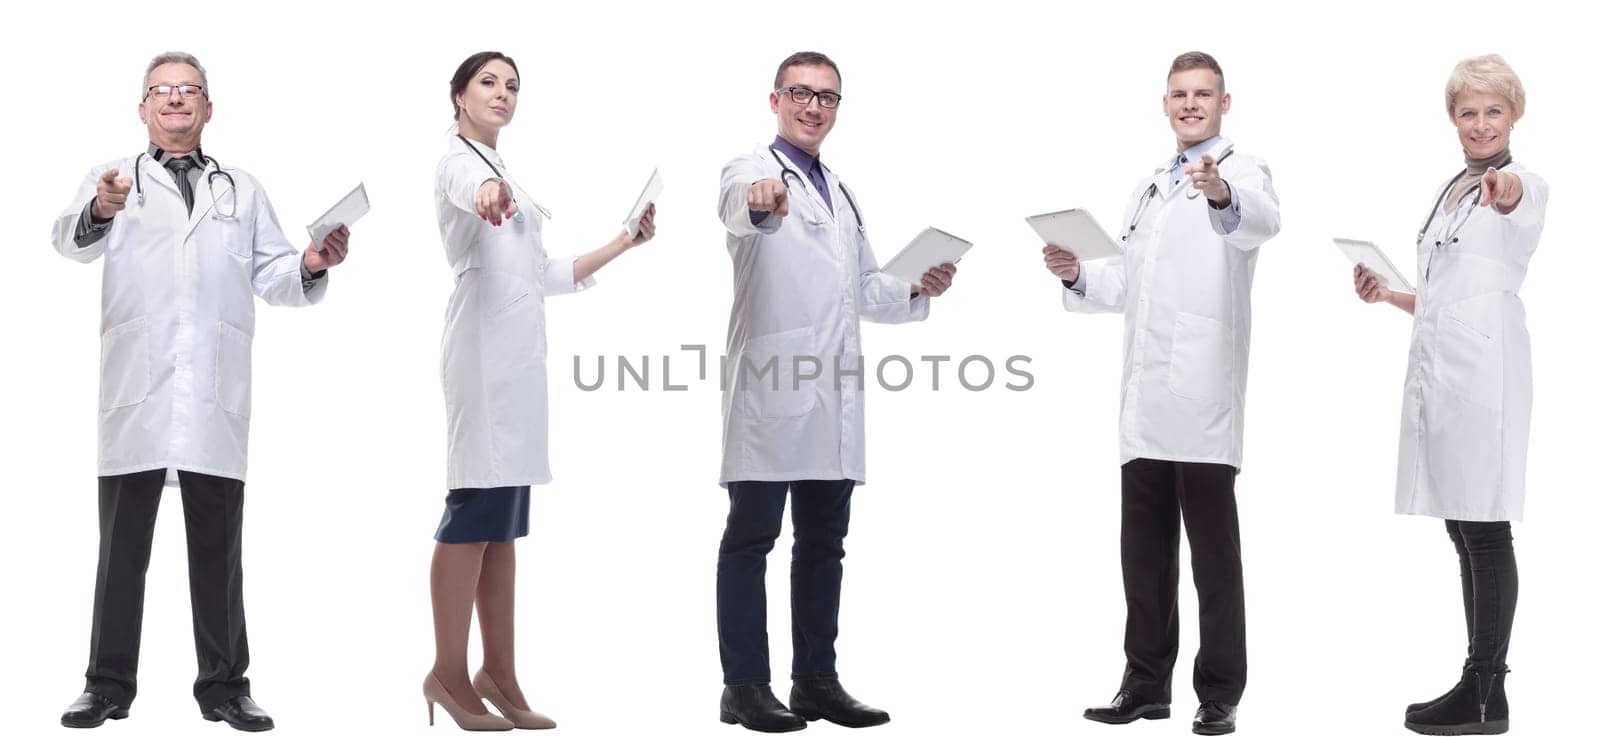 group of doctors with clipboard isolated on white background